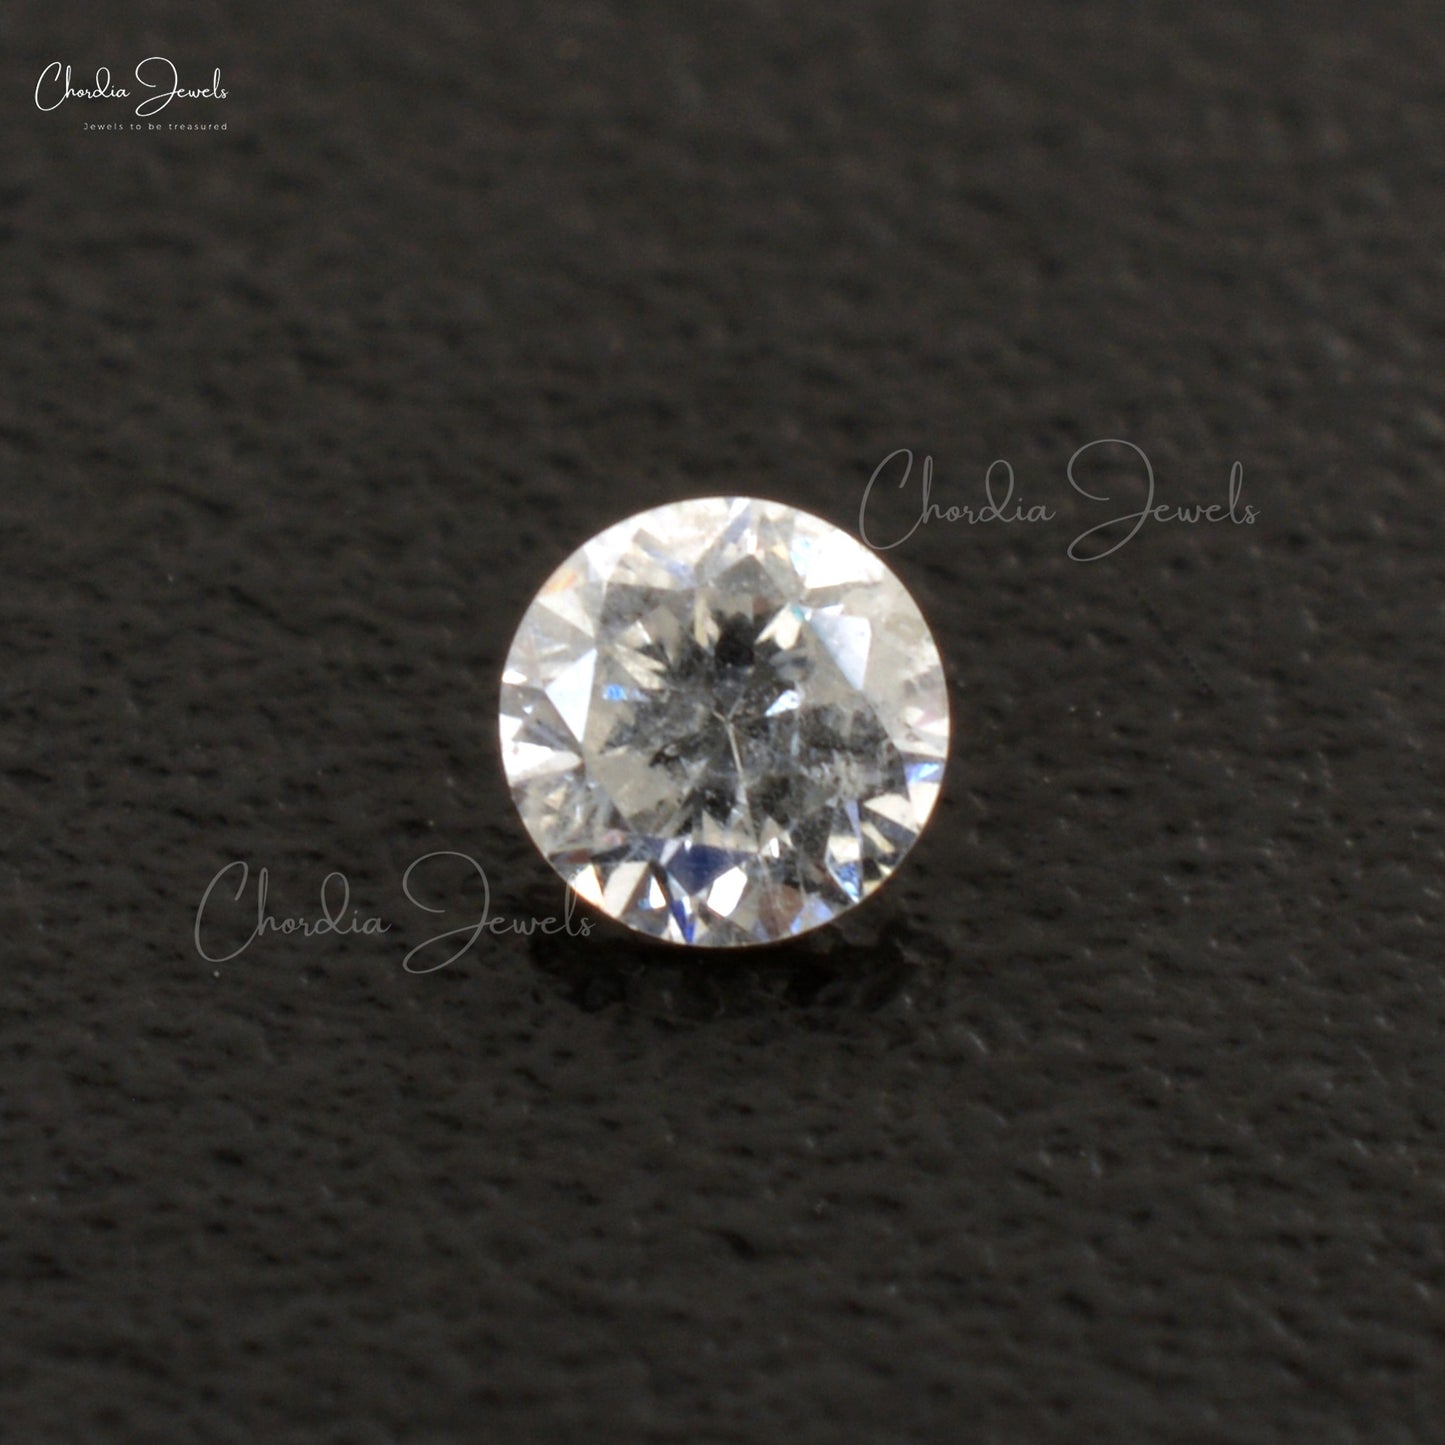 White Diamond I1-I2 / G-H Faceted Round Cut 1.50 MM Natural Gemstone, 1 Piece